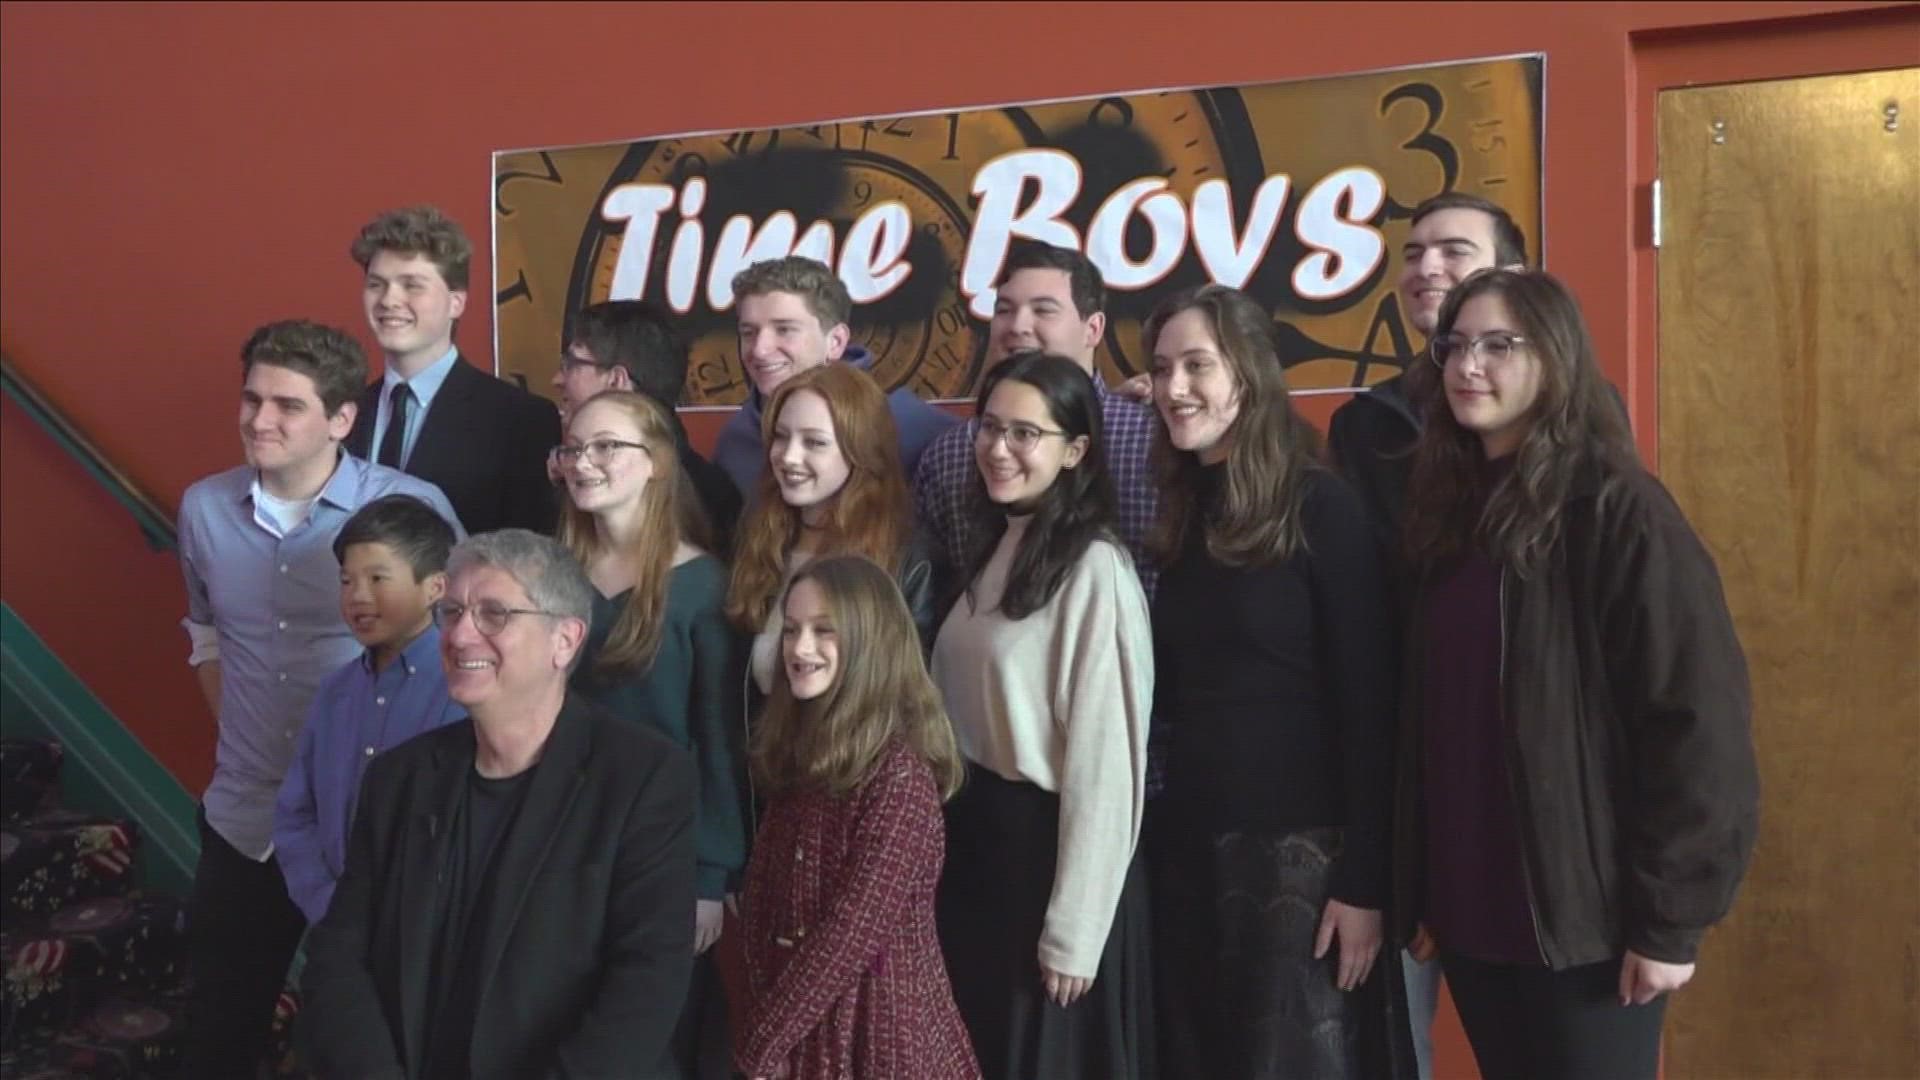 Winning more than 40 awards in film festivals across the country, "Time Boys" features a soundtrack comprised of Memphis artists like ReFrame alongside Dee Snider.